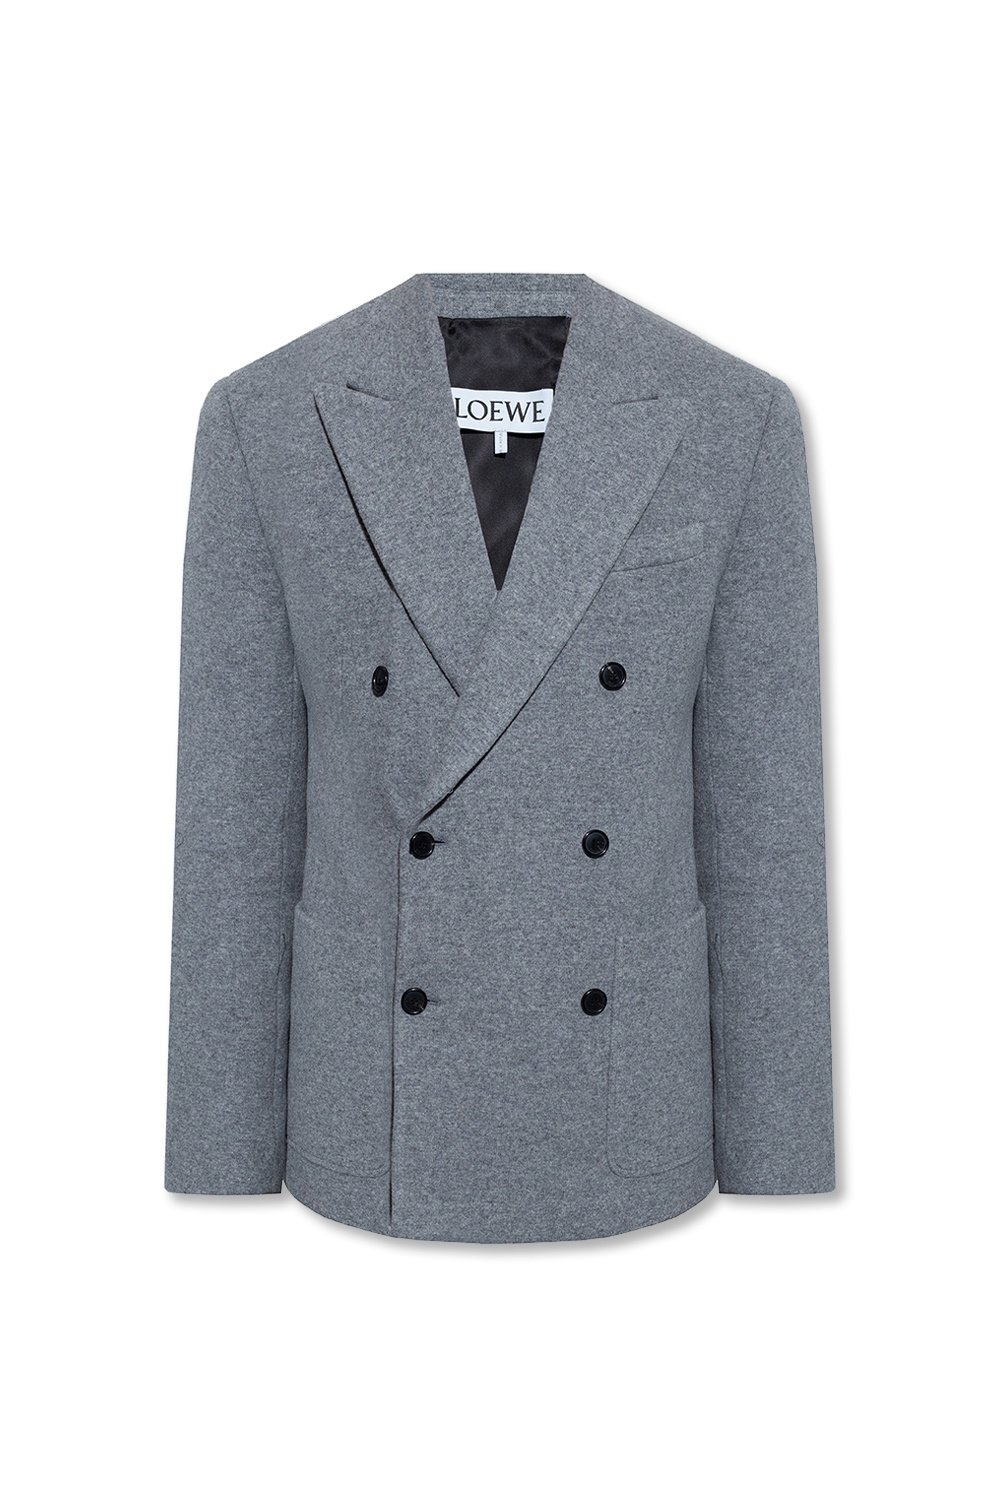 Loewe Cropped double-breasted coat